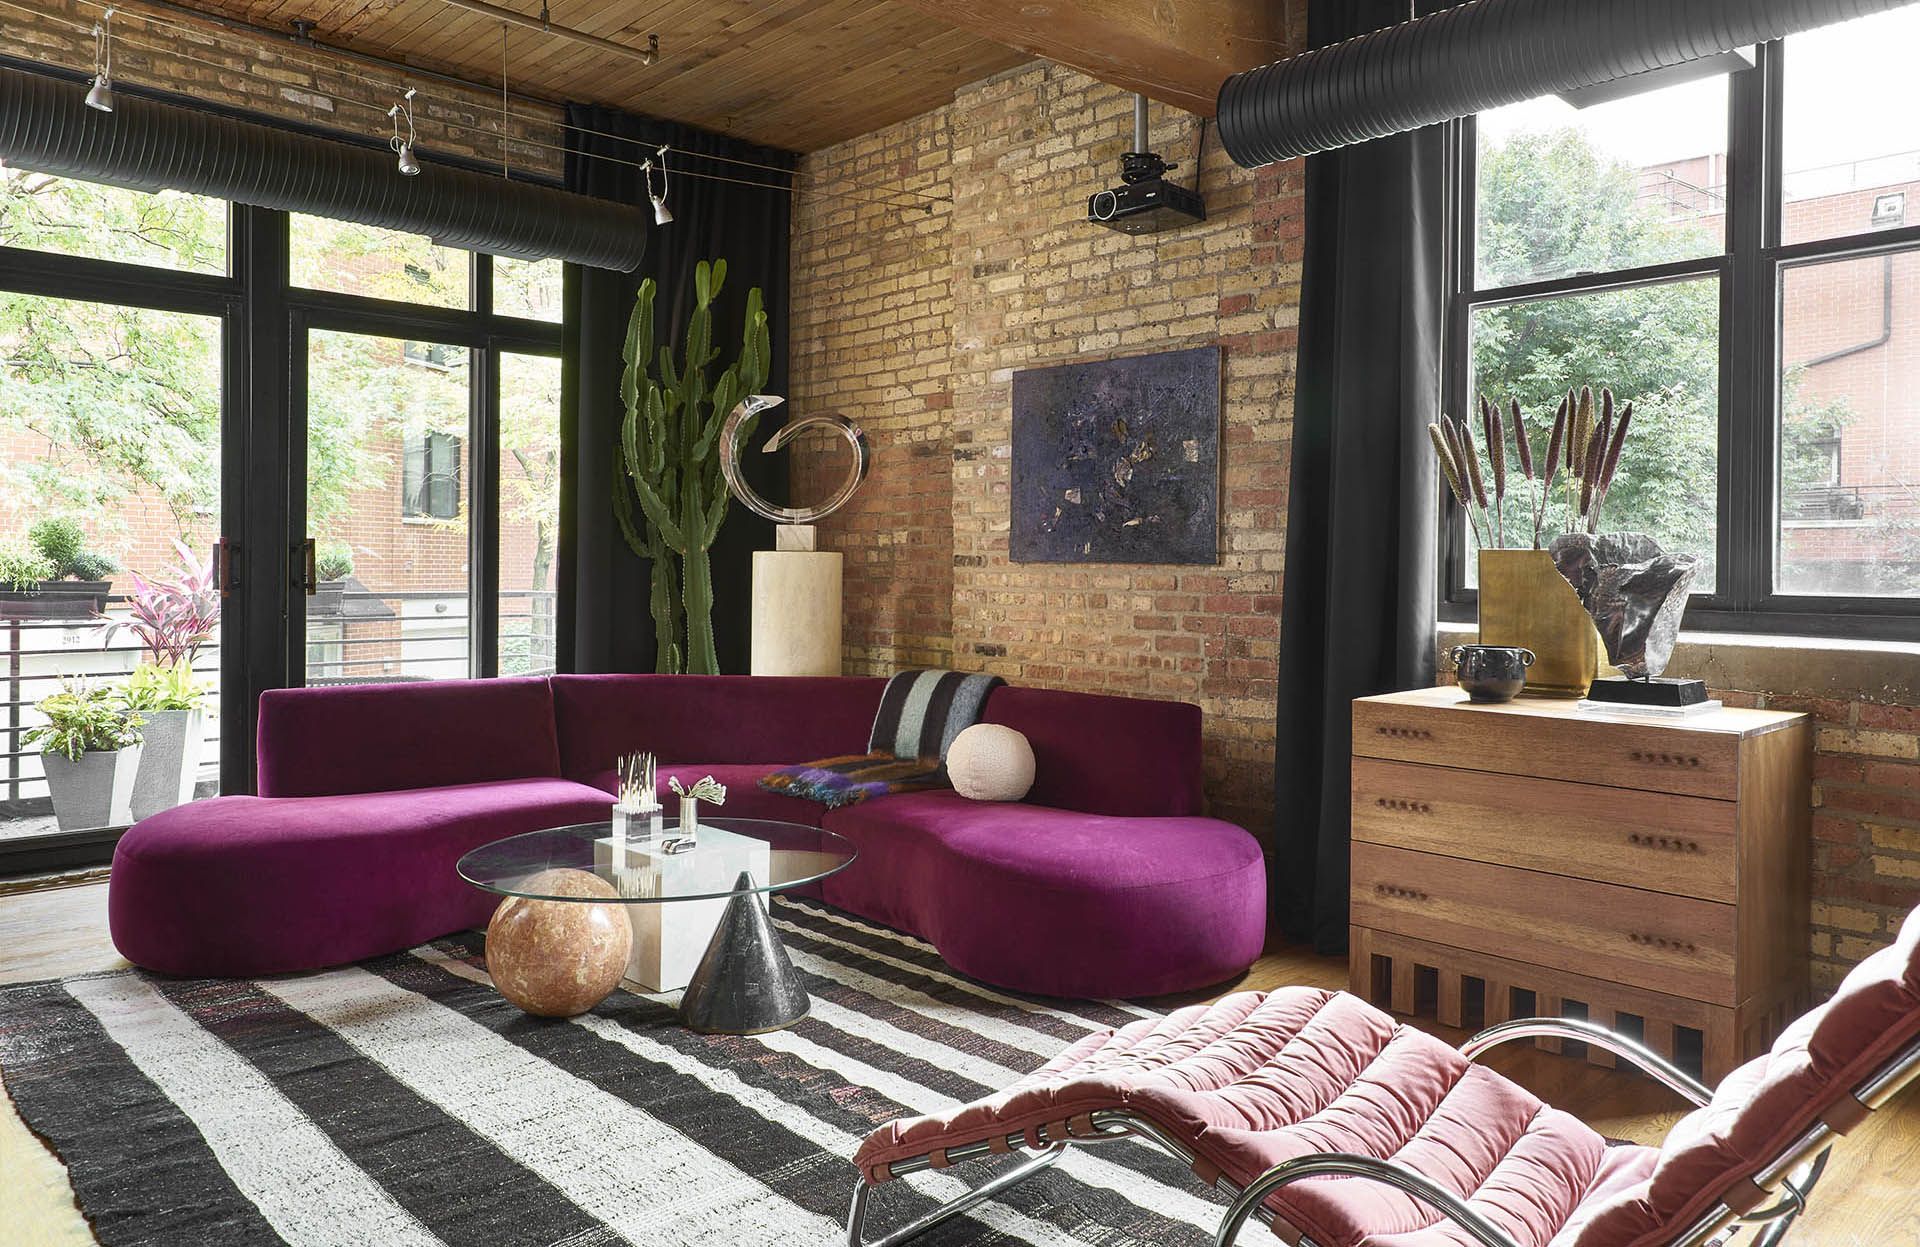 6 ways to add industrial style furniture to your interior - Wooden